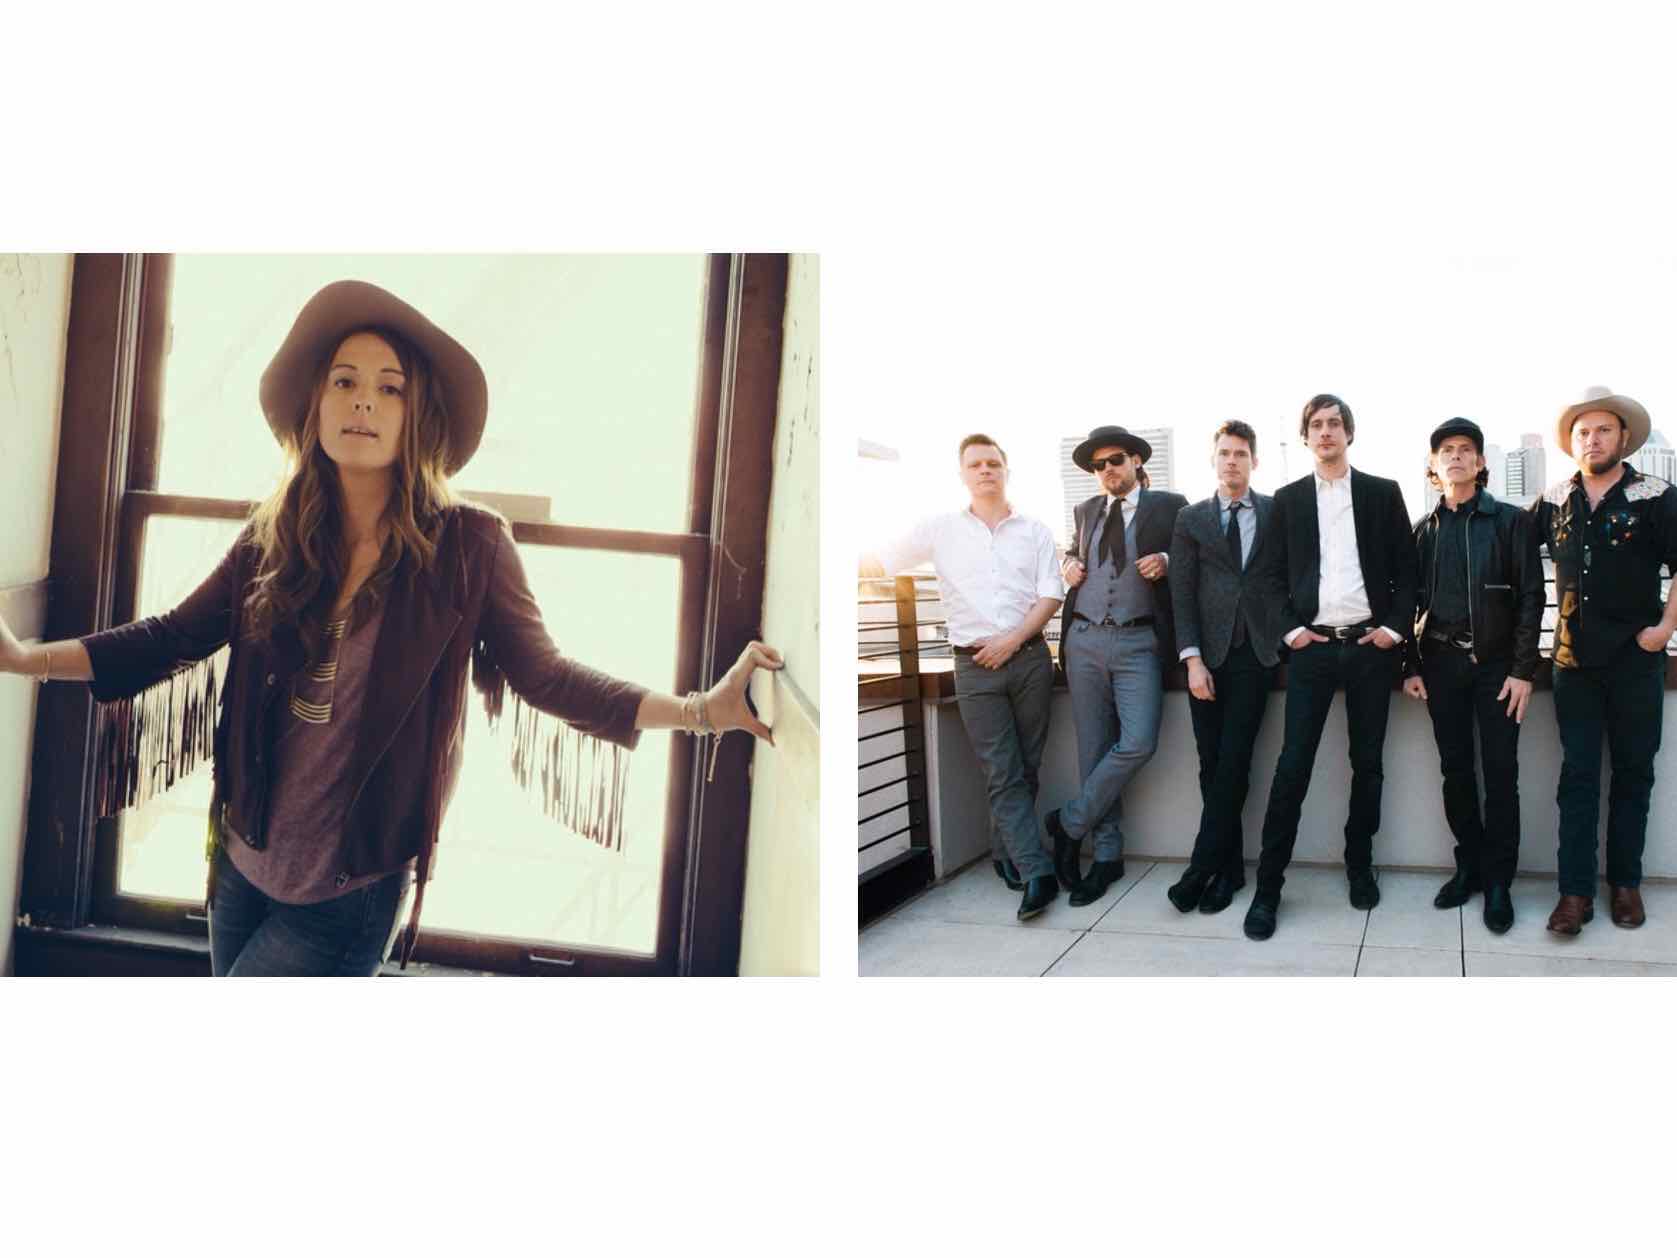 Brandi Carlile & Old Crow Medicine Show. Photo courtesy of the artist. Used with permission.